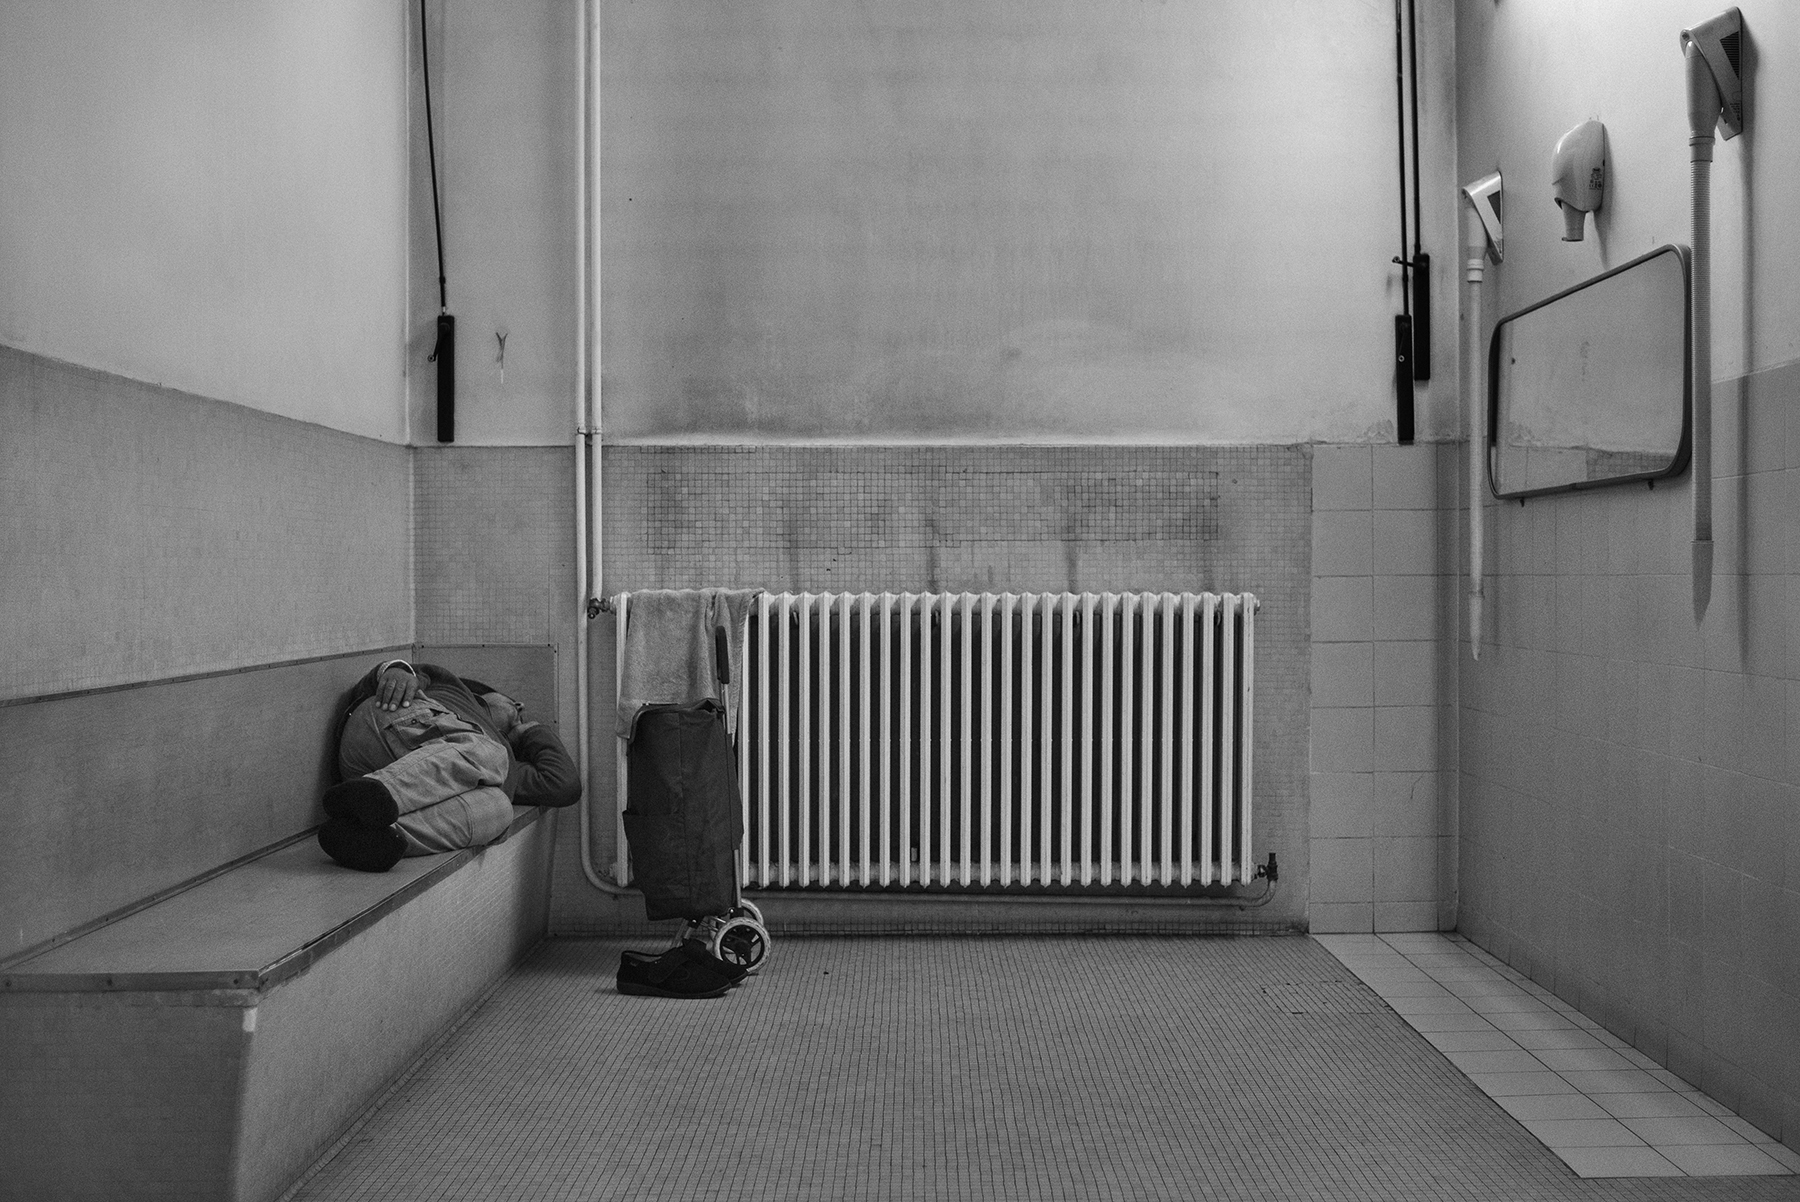  A man sleeps inside the Public Baths of via Bianzé in Turin, Italy; December 2018.
In the winter season, public shower's users - especially whose homeless - take advantage of the warm environment to rest for a couple of hours, even if it is theoreti